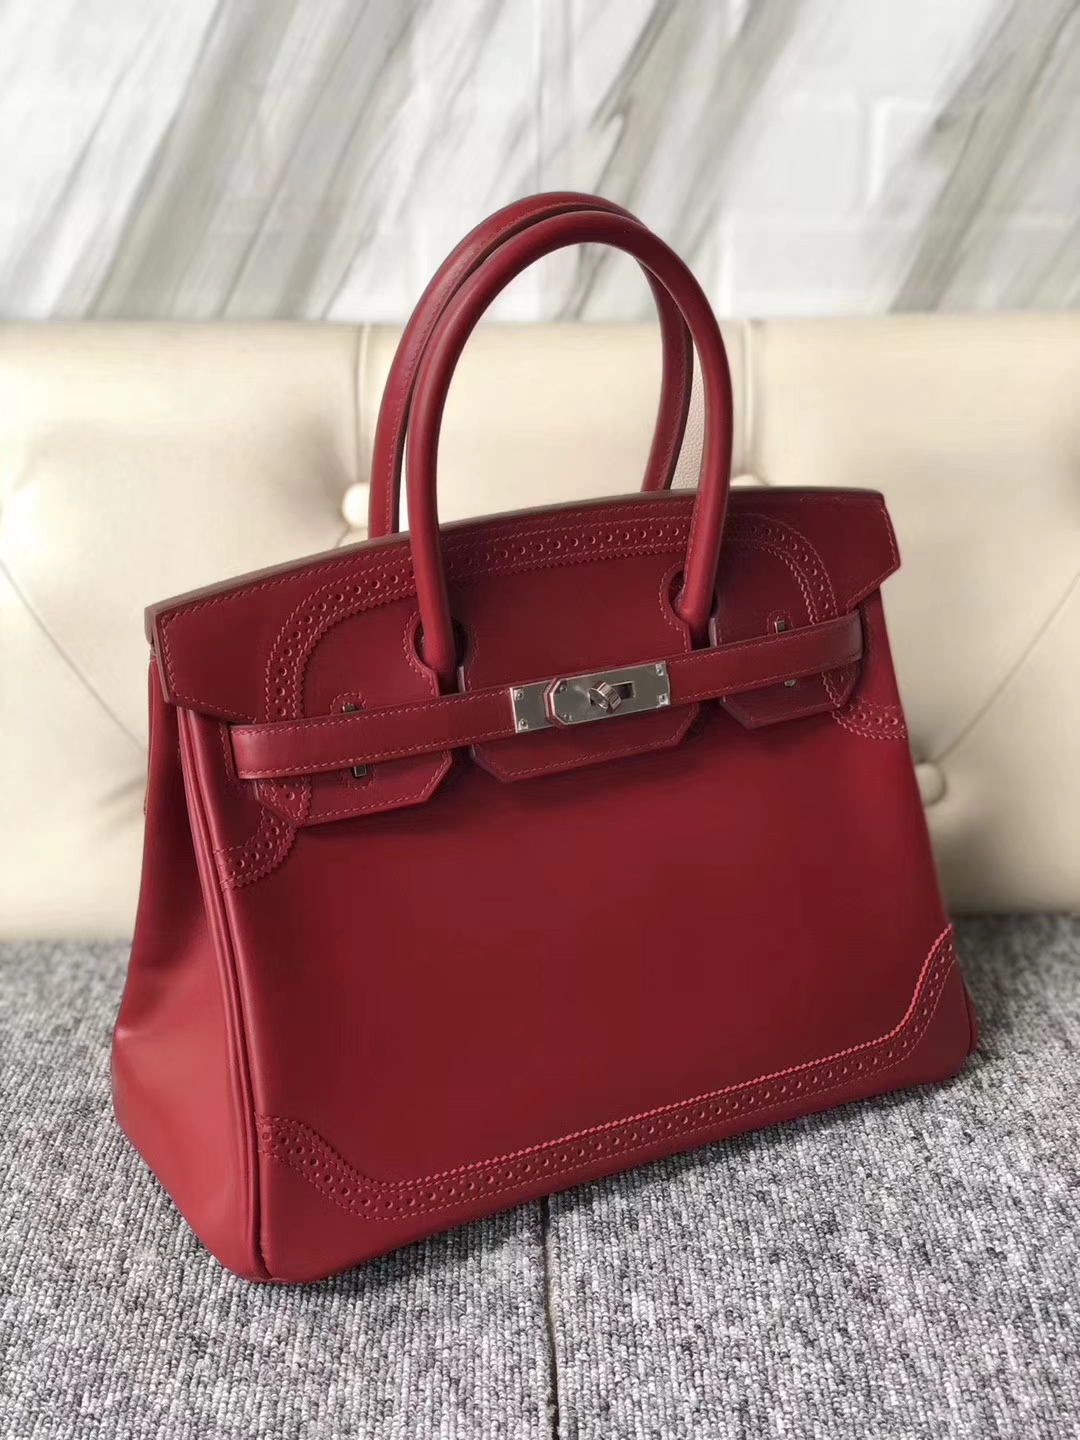 New Hermes Rouge Ruby Boxcalf Ghillies Birkin Bag30cm Silver Hardware